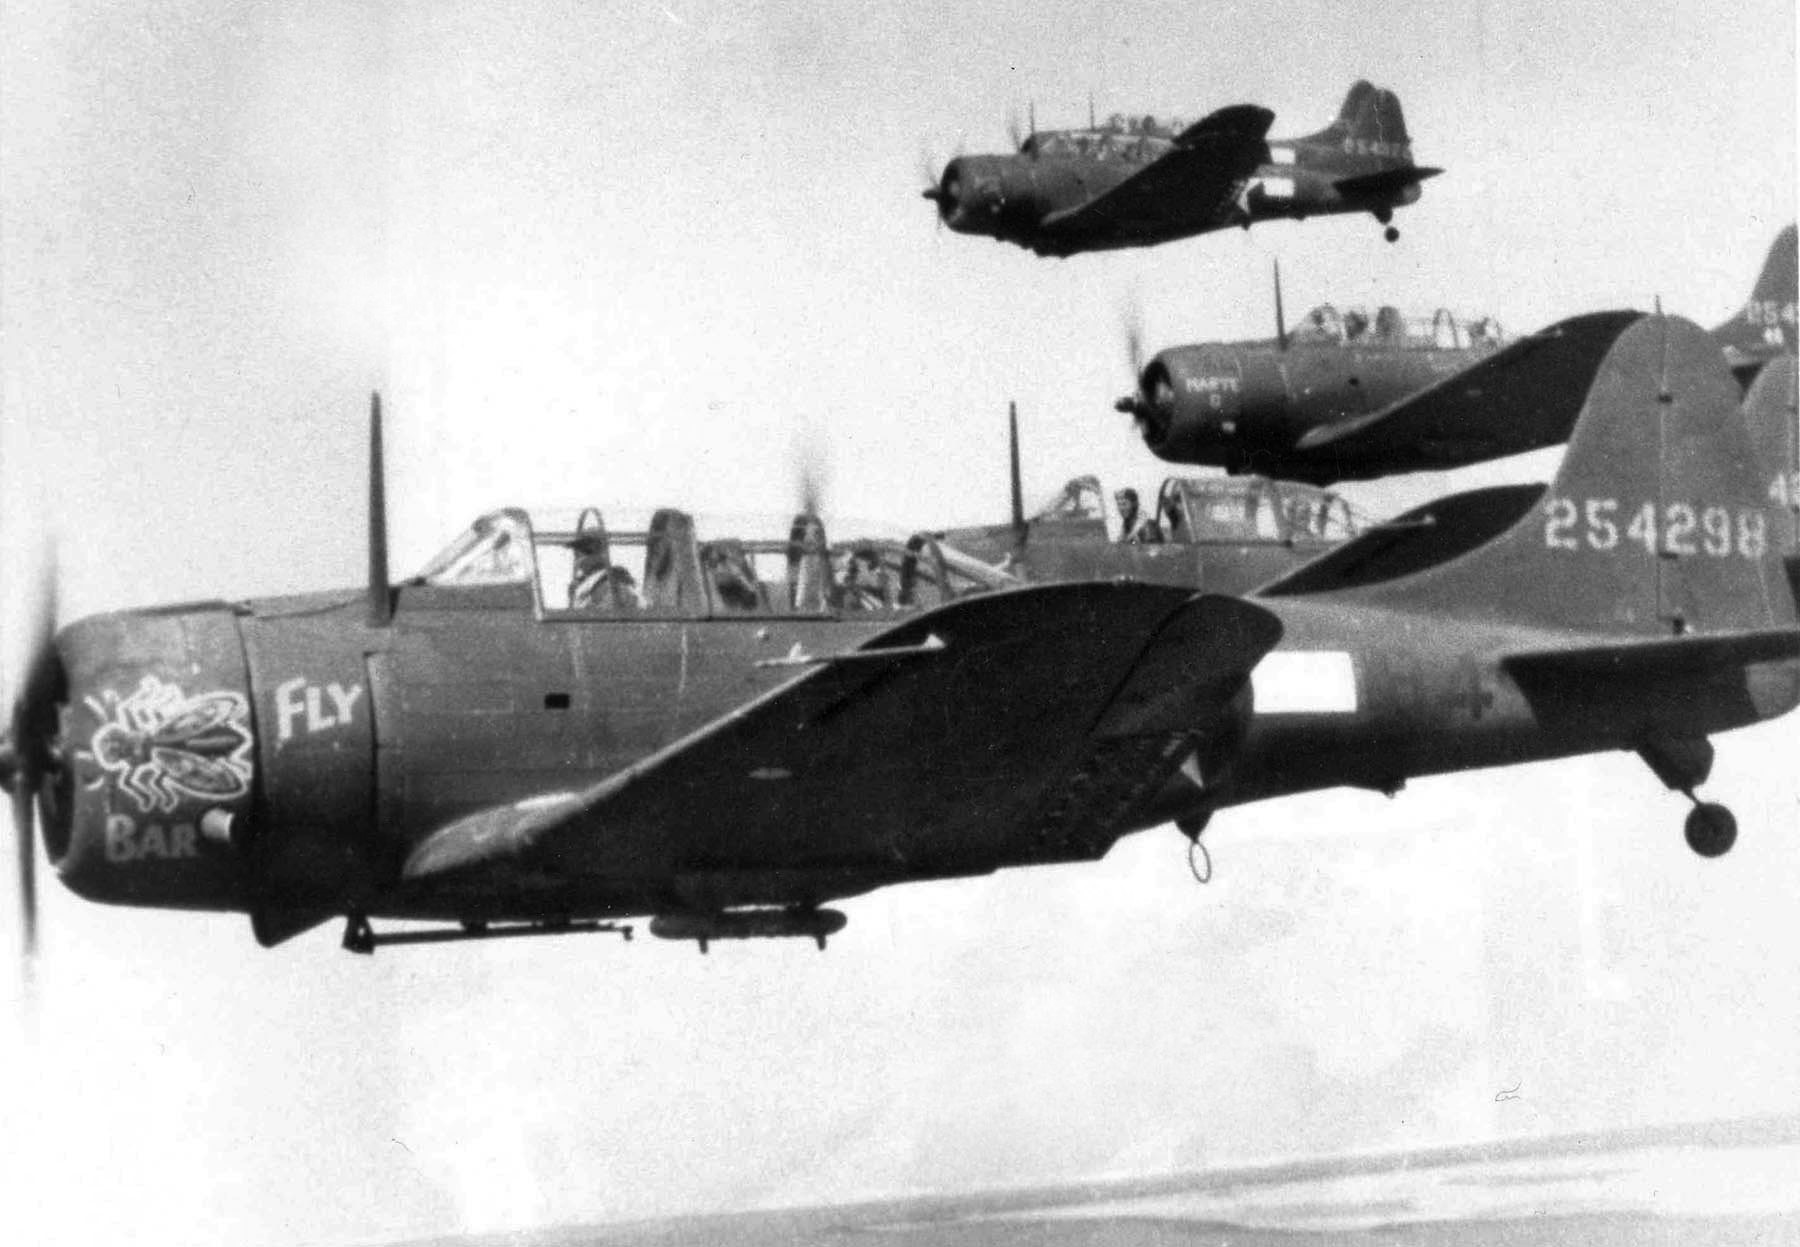 A flight of Douglas A-24 Banshee dive bombers shows its age in this photo. Although these planes managed to get airborne, many of the A-24s supplied to the 27th Bombardment Group were worn out.